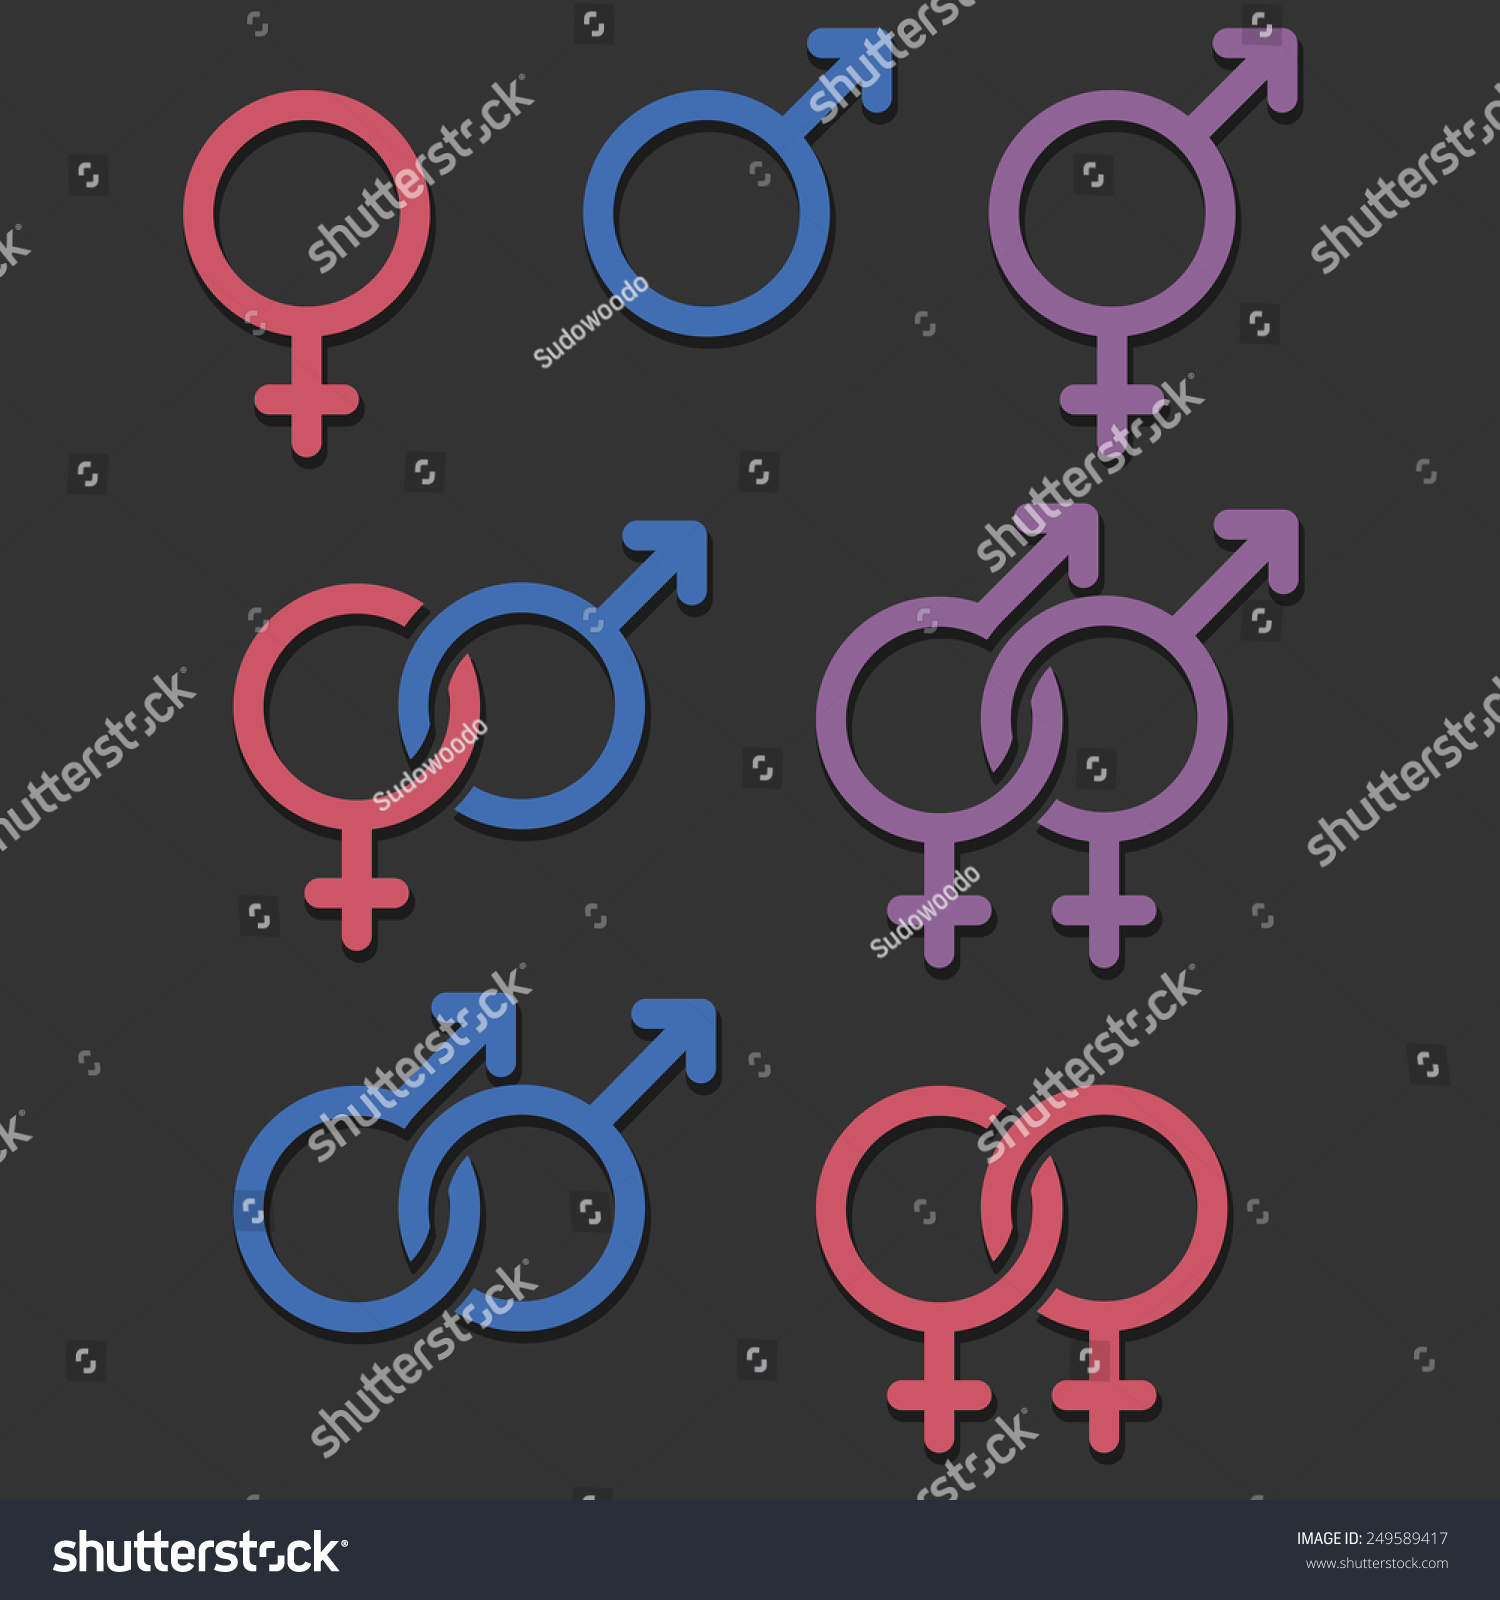 Set Of Gender And Orientation Icons Royalty Free Stock Vector